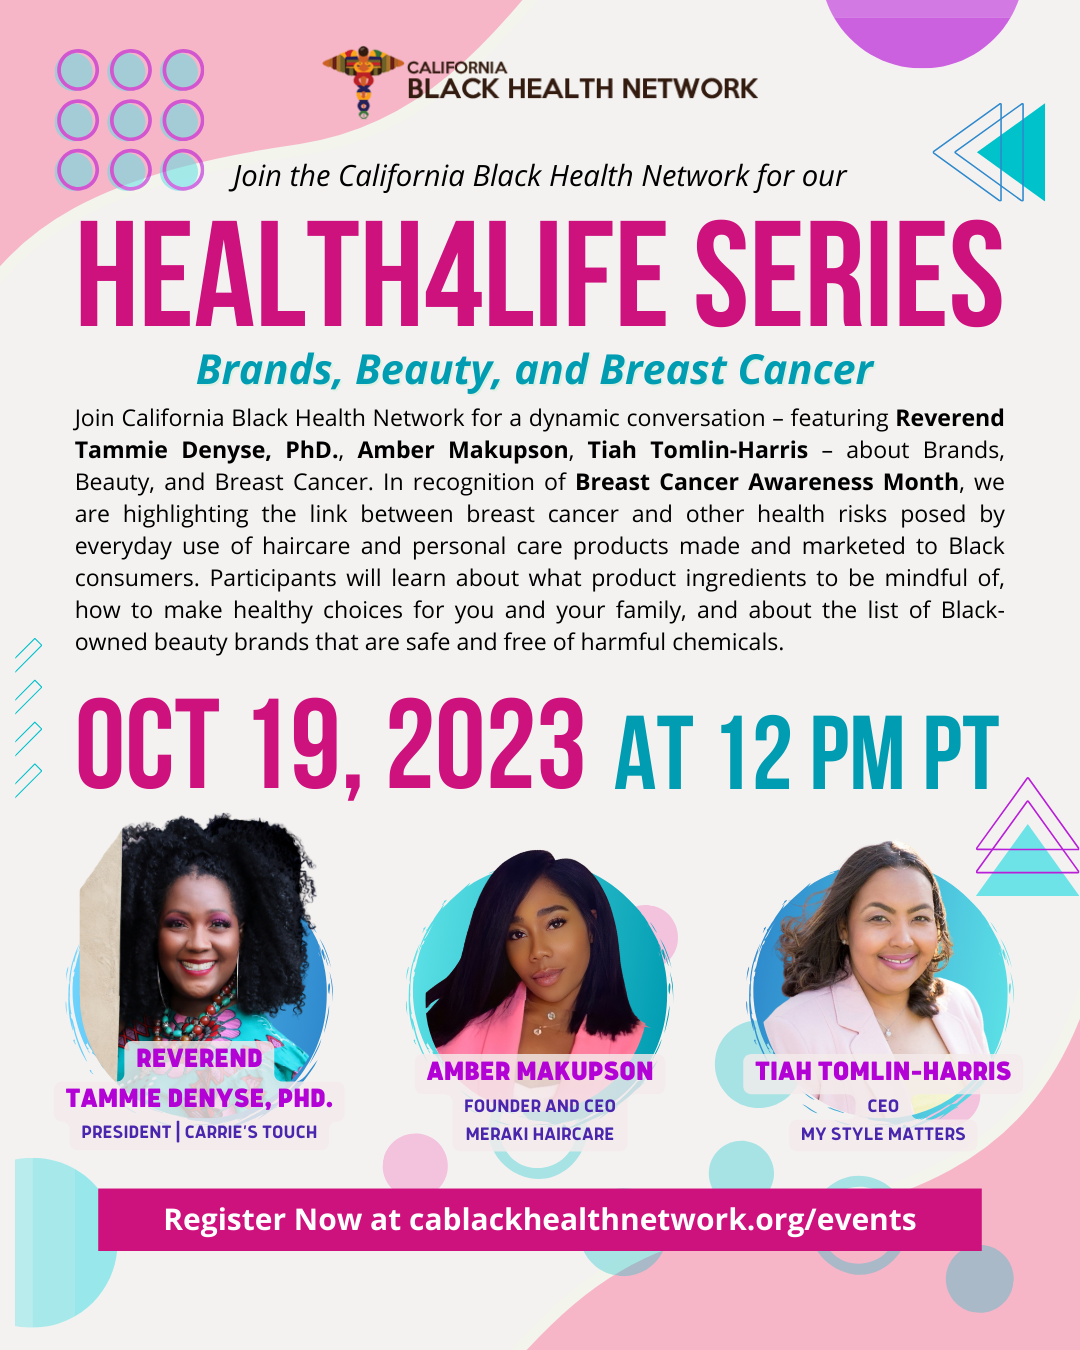 Health4Life Series: Brands, Beauty and Breast Cancer